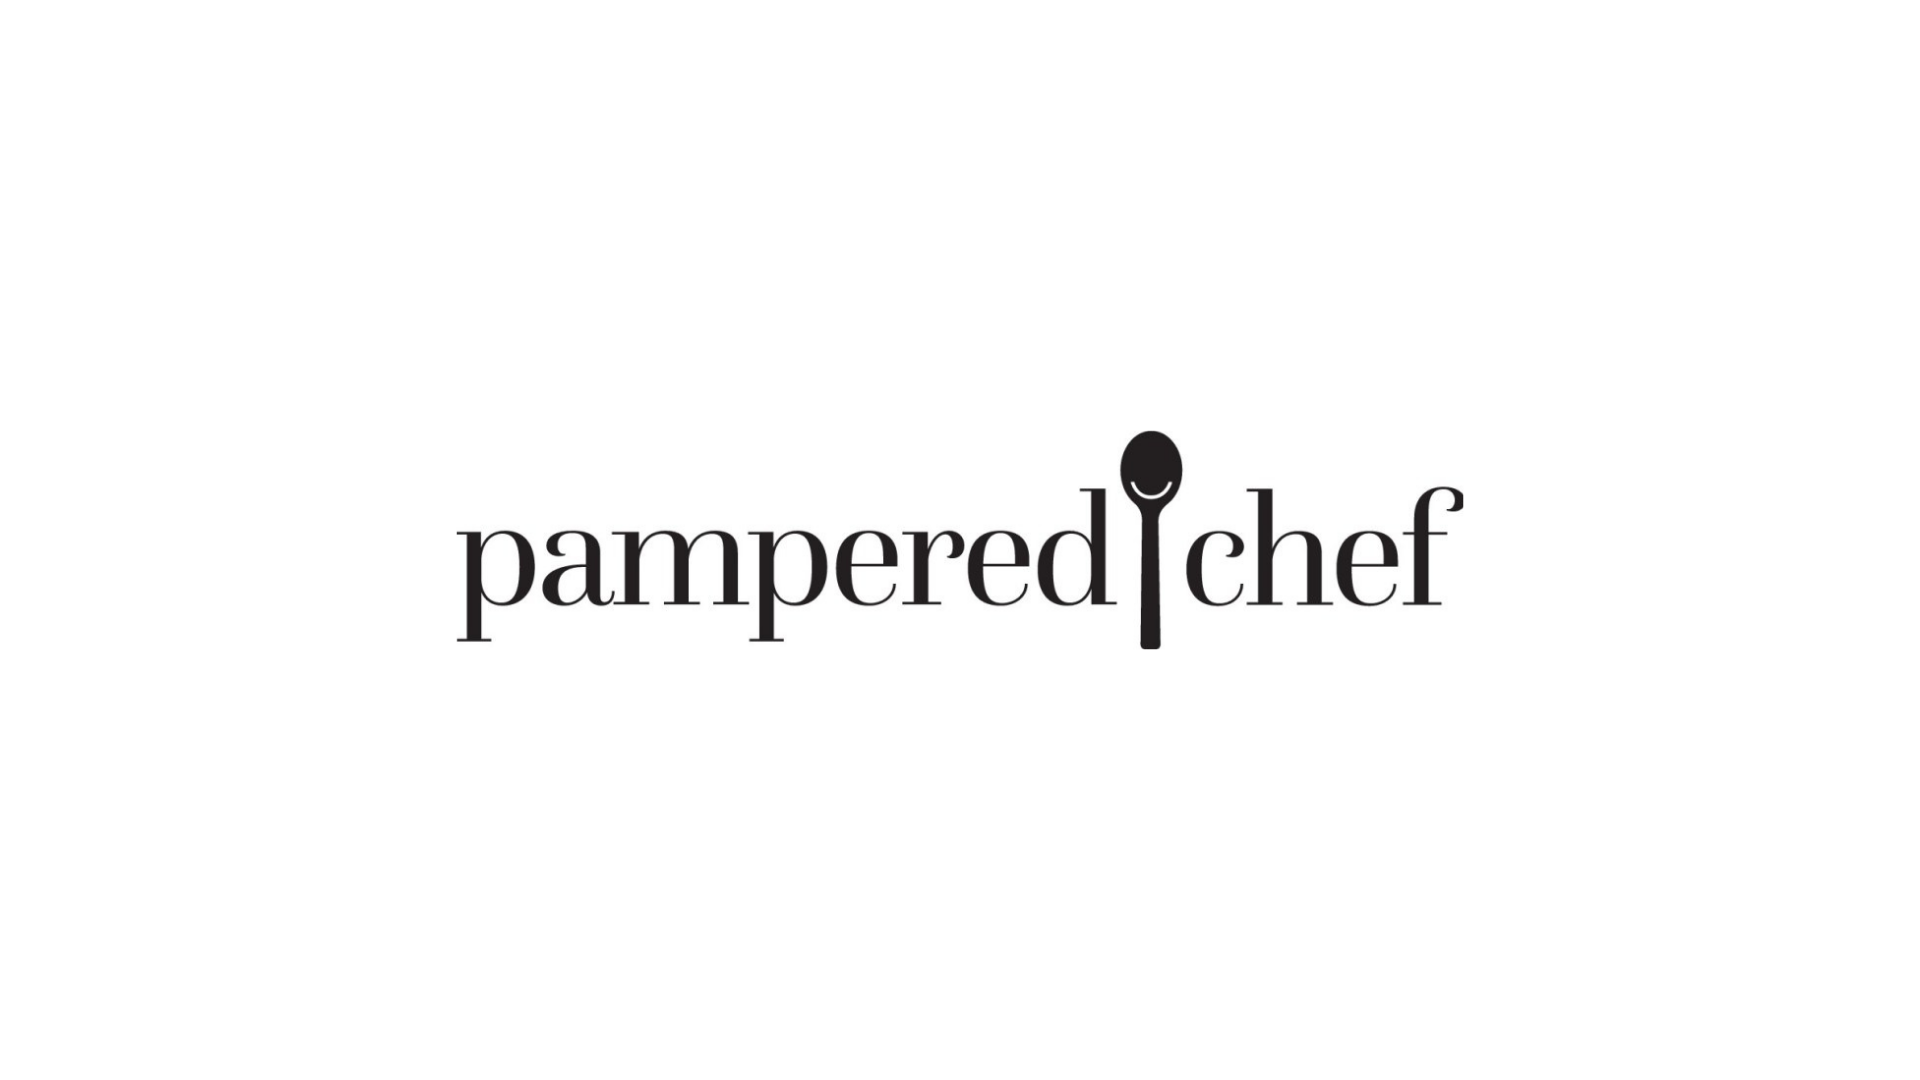 https://www.directsellingnews.com/wp-content/uploads/2021/04/Pampered-chef-logo-article-header.png